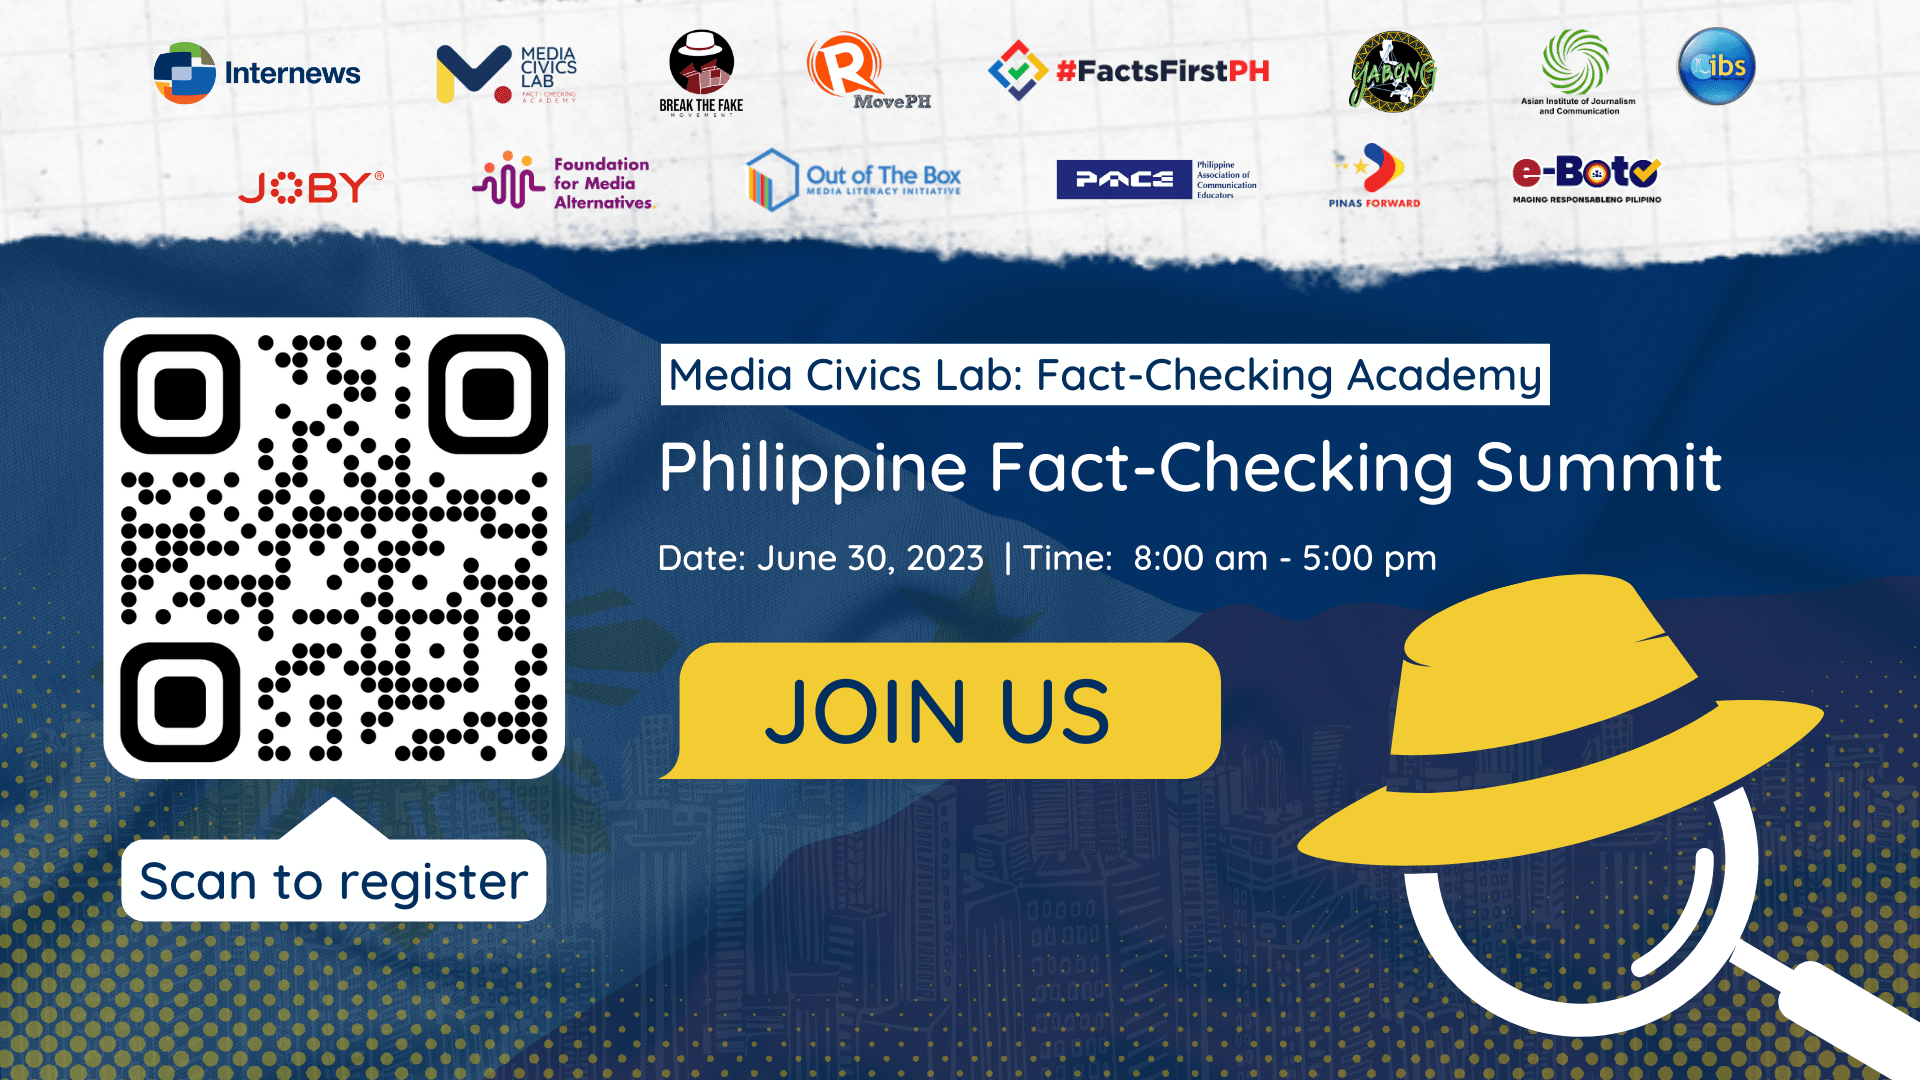 Join the Philippine Fact-Checking Summit 2023!